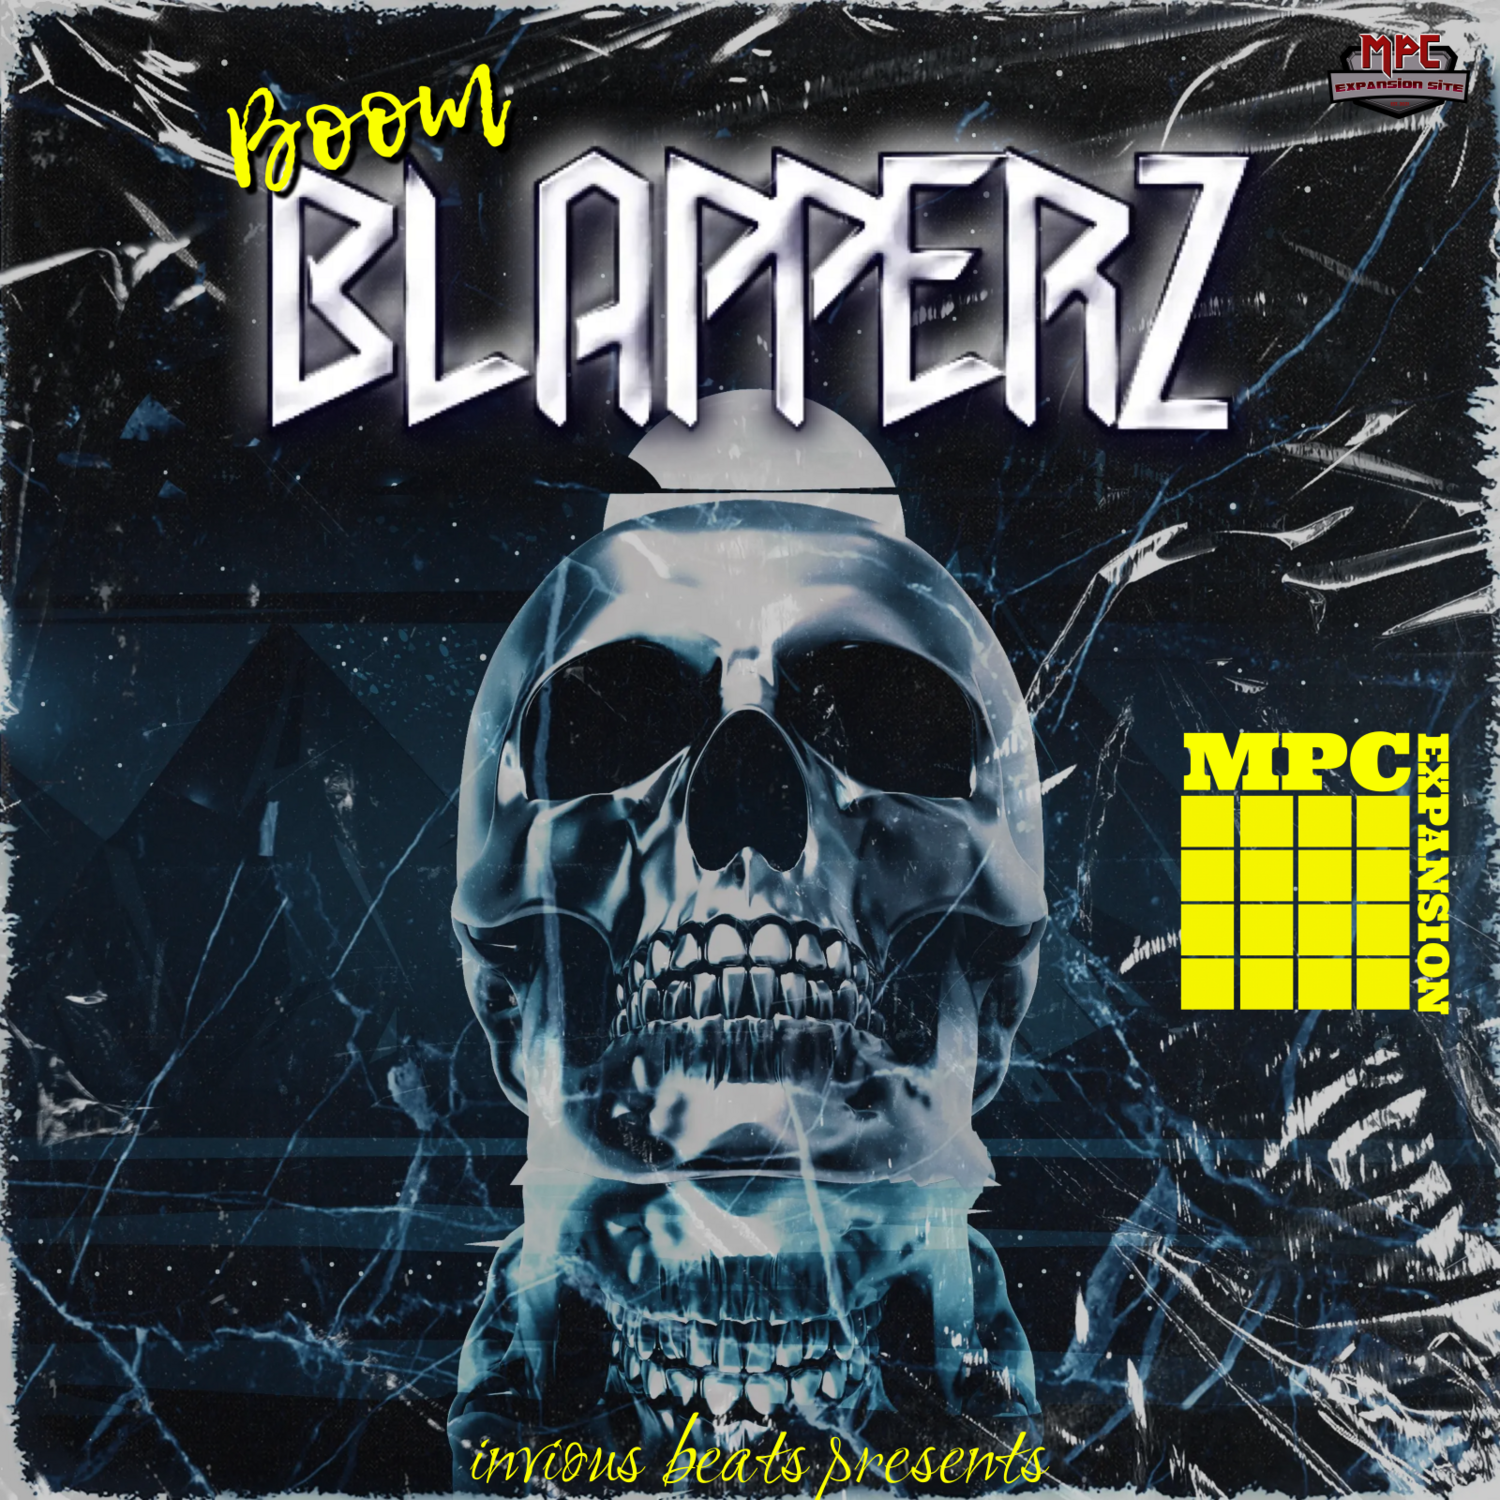 MPC EXPANSION 'BOOM BLAPPERZ' by INVIOUS